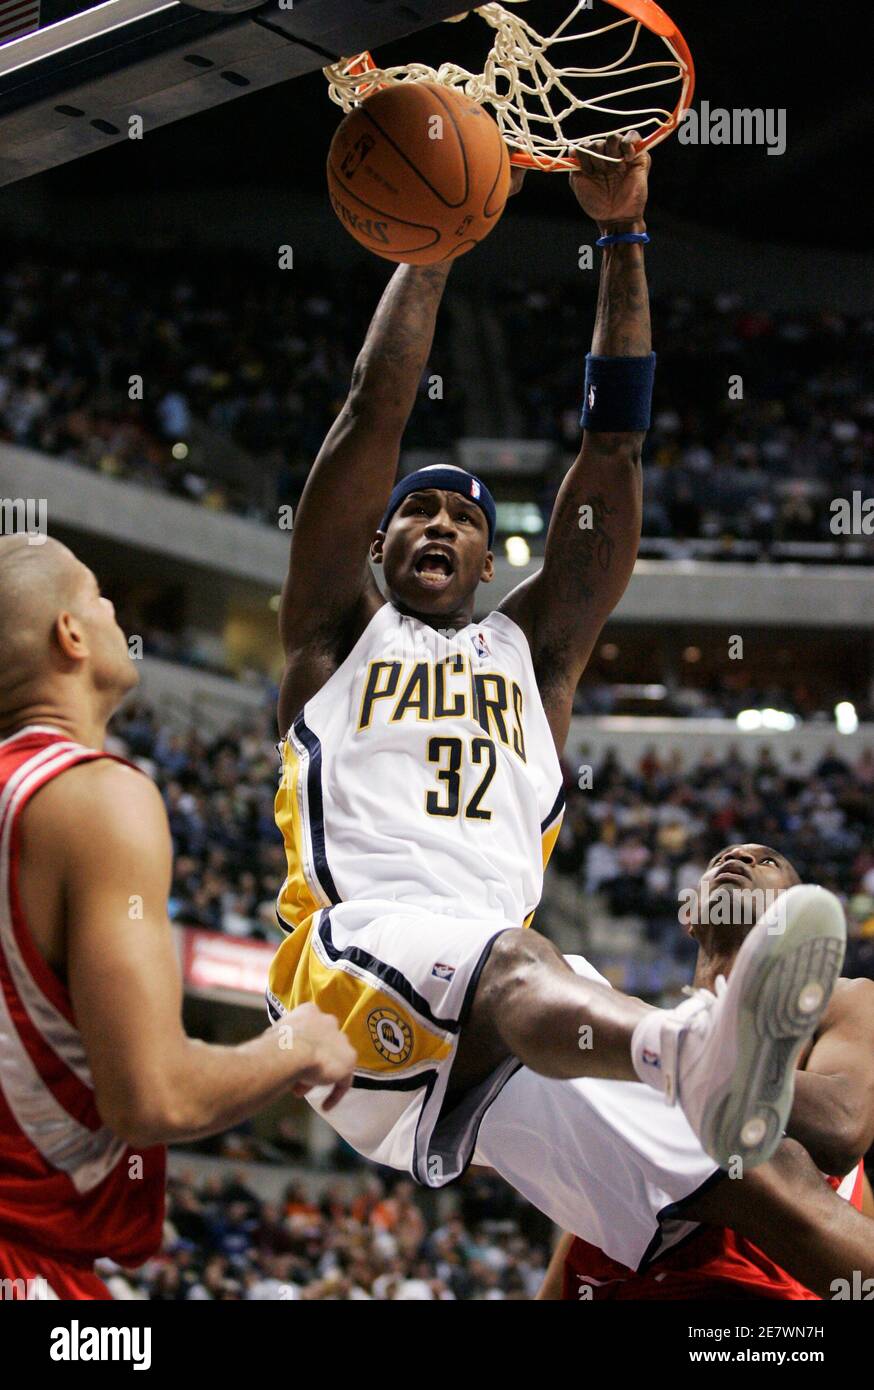 Indiana Pacers forward Al Harrington (32) dunks the basketball against the  Houston Rockets during the third